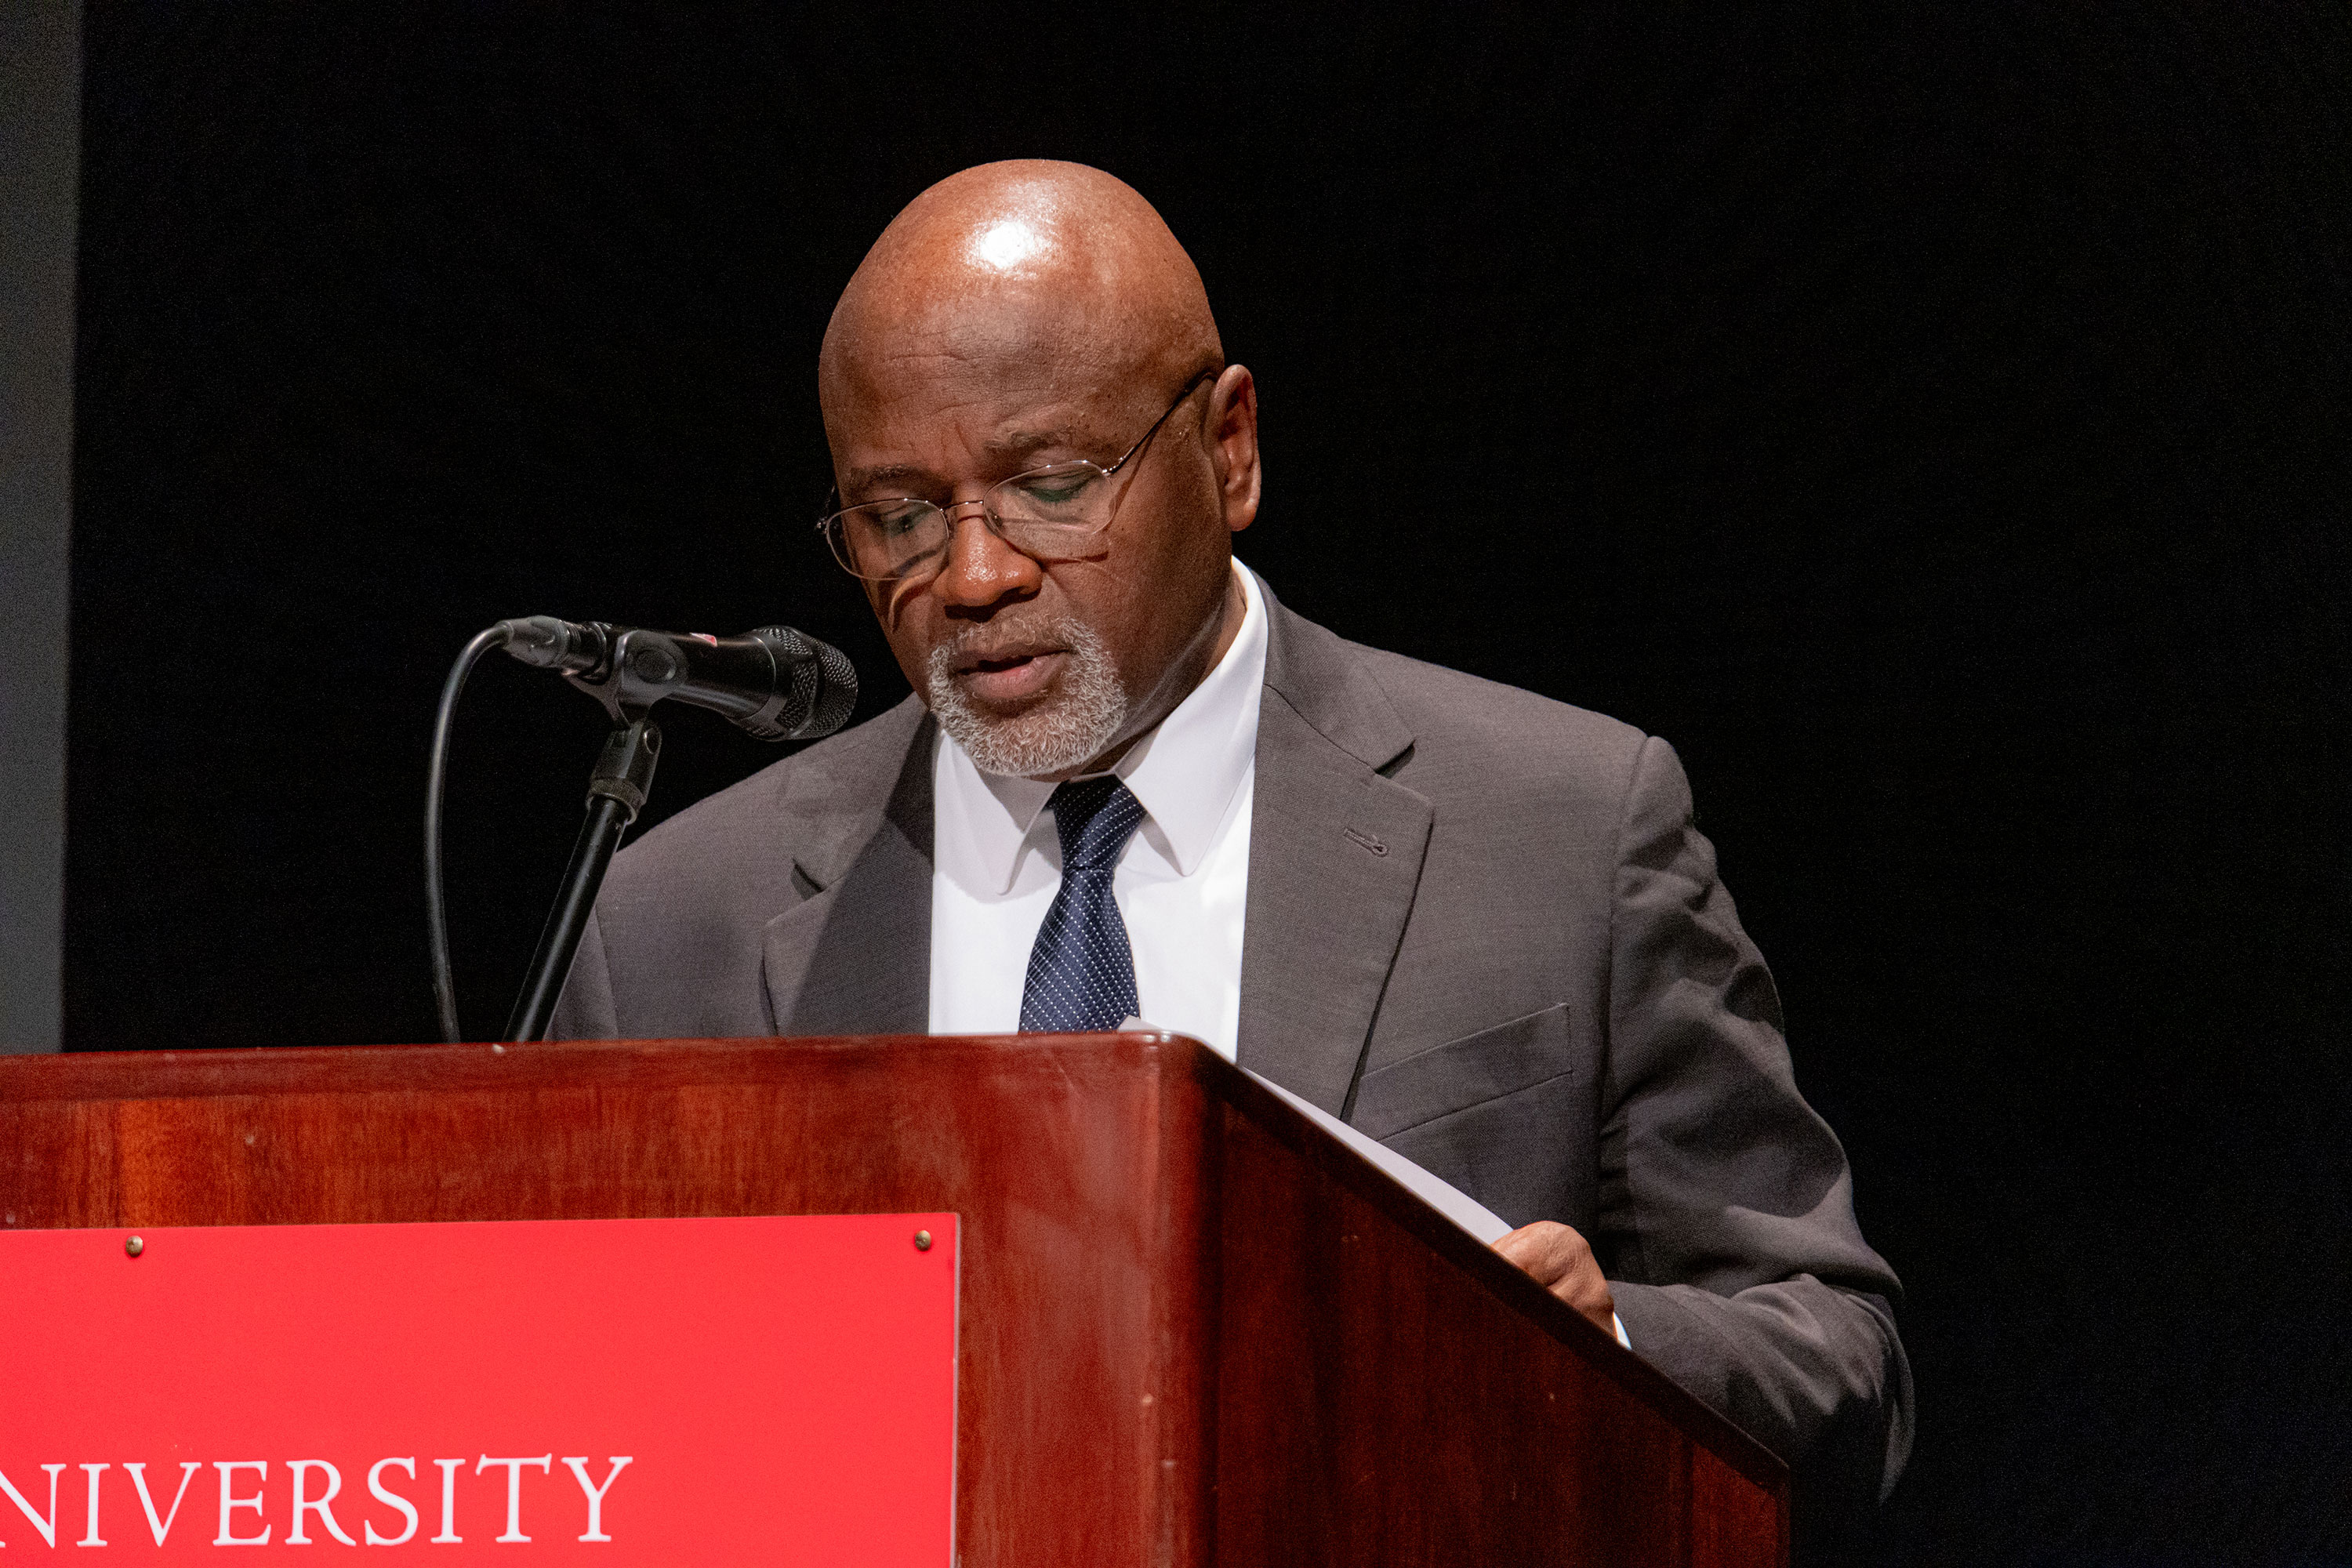 Photo of the Honorable Richard Robinson speaking at UHart during the MLK Observance